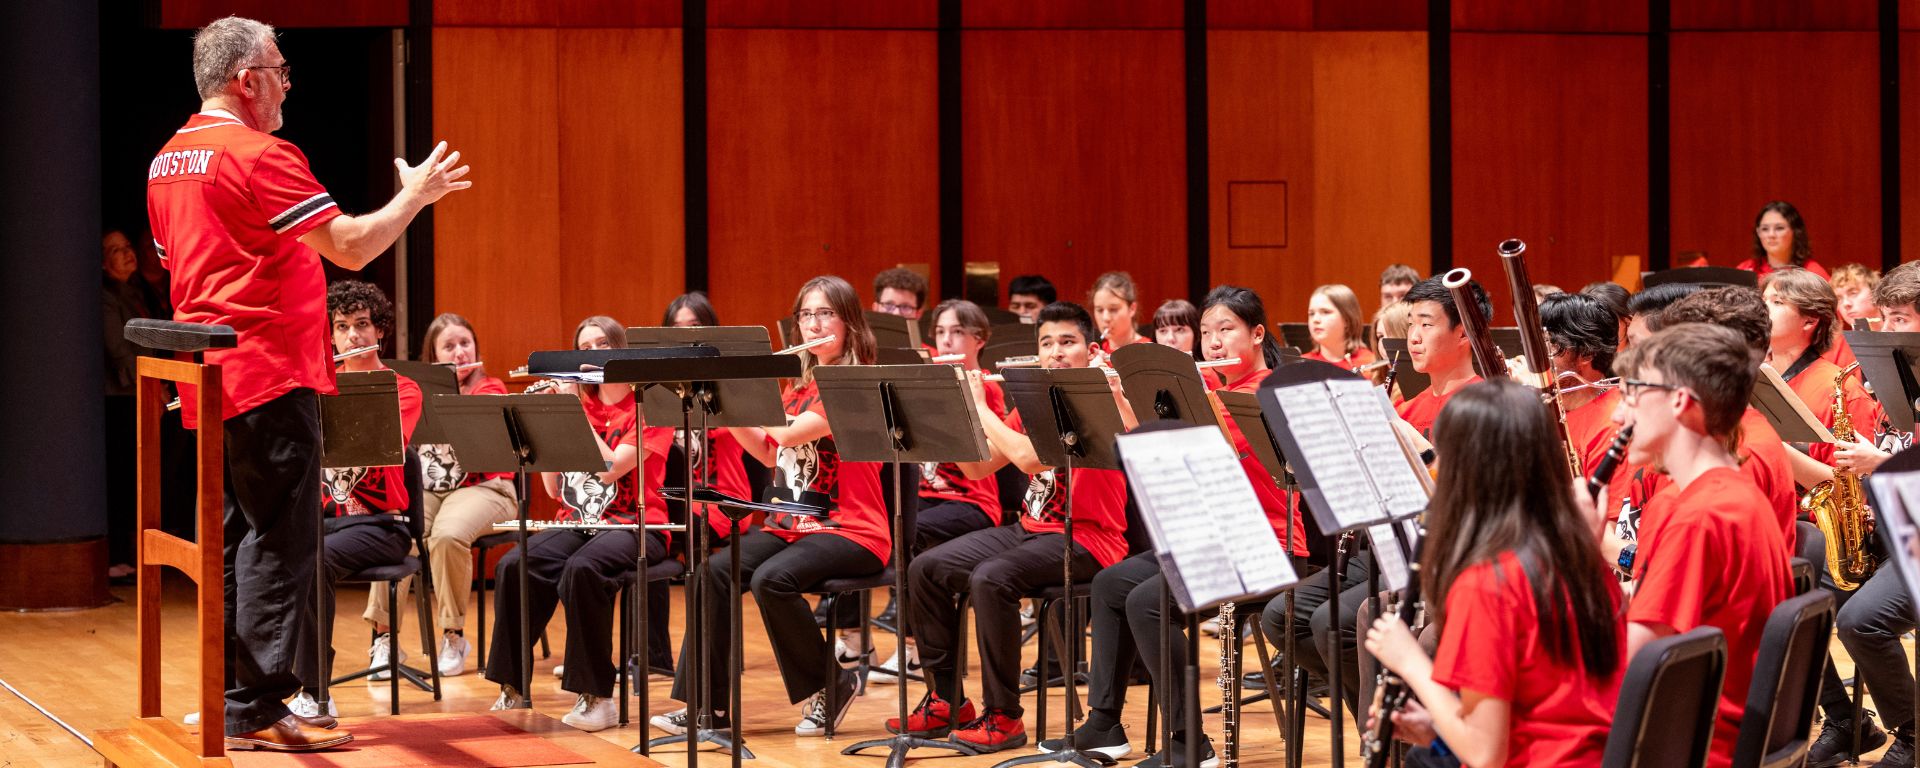 David Bertman in a red UH shirt conducting the High School Honor Band Project